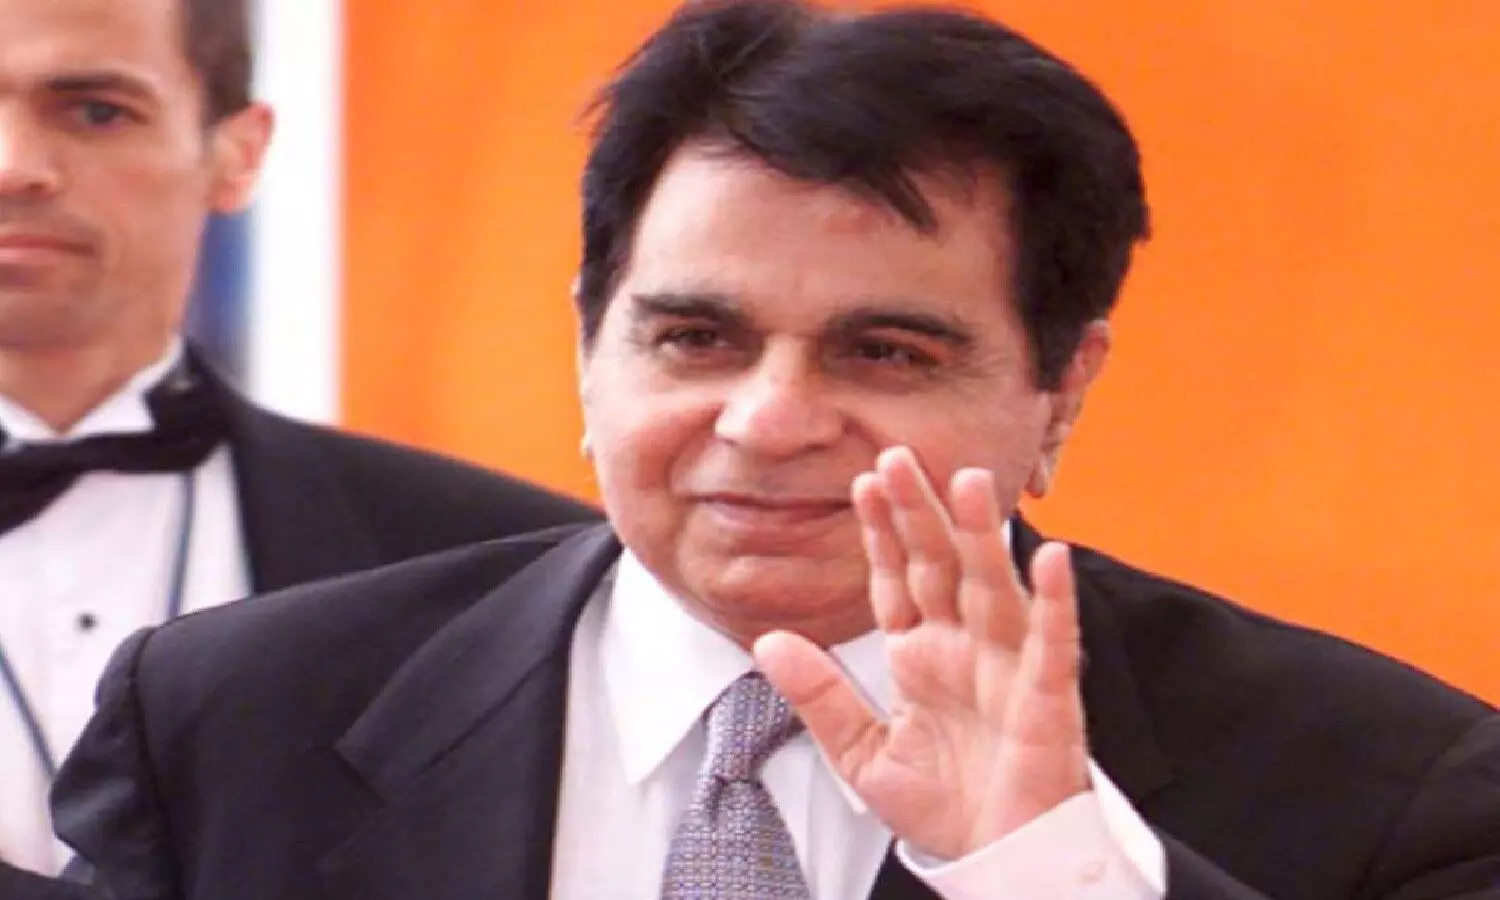 Dilip Kumar was deeply saddened after the demolition of the Babri structure. started some Muslim politics.